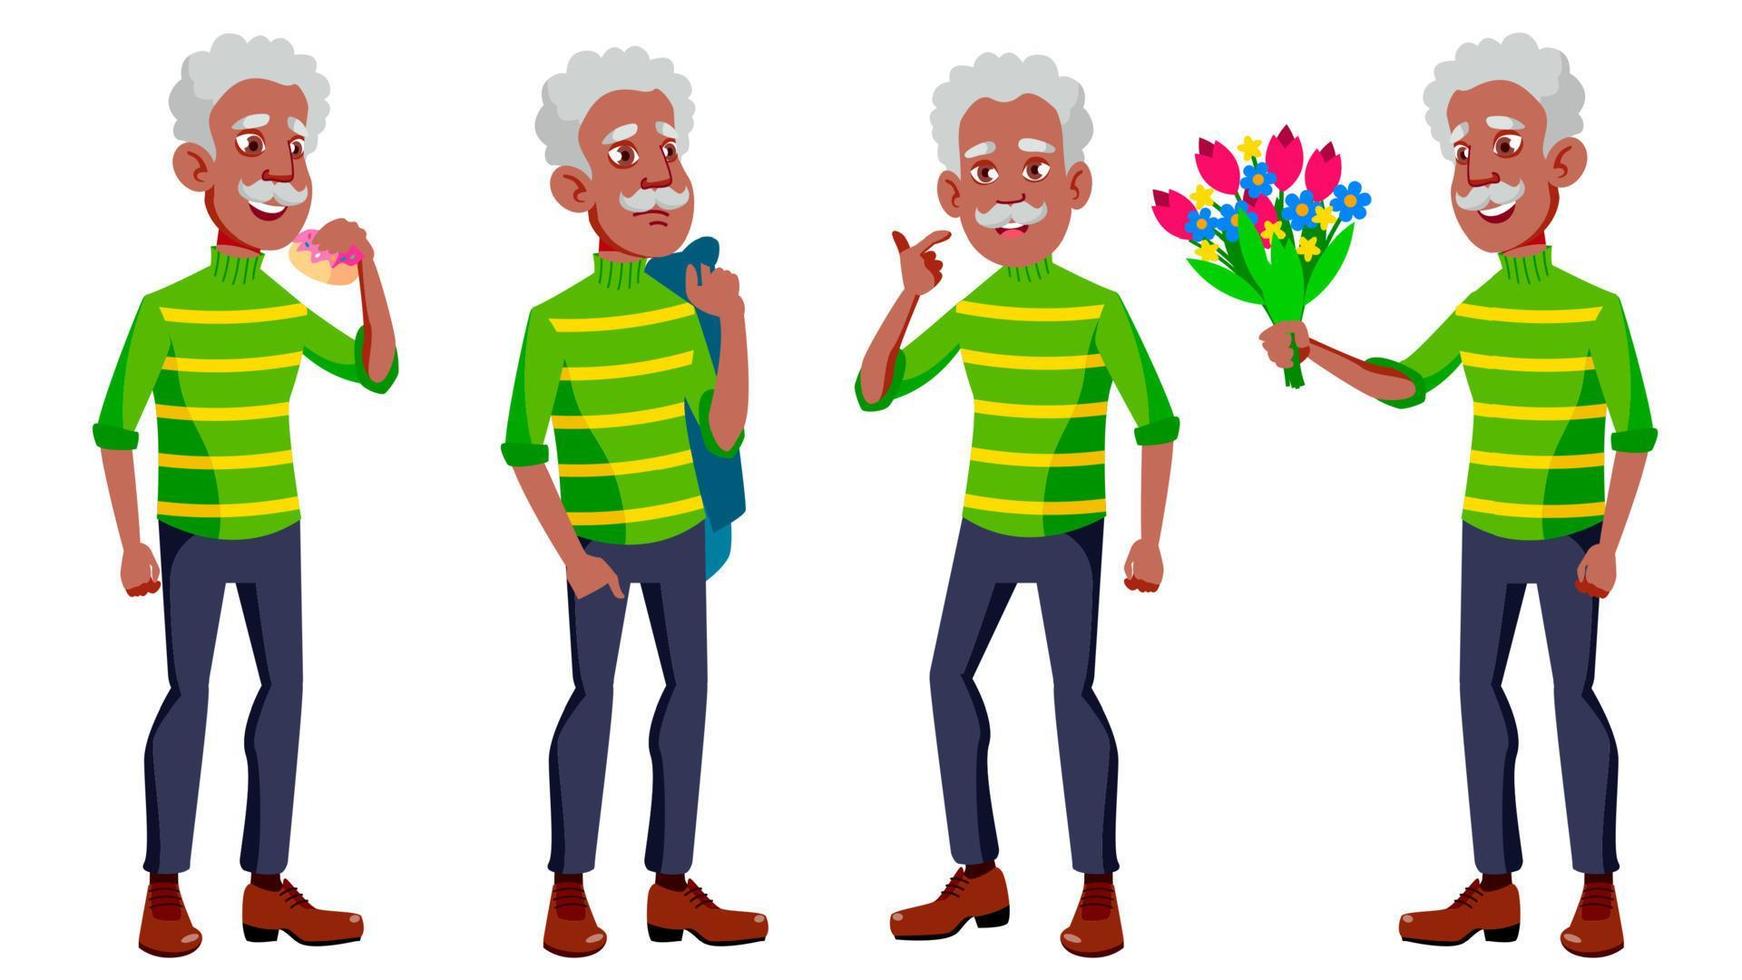 Old Man Poses Set Vector. Black. Afro American. Elderly People. Senior Person. Aged. Friendly Grandparent. Web, Poster, Booklet Design. Isolated Cartoon Illustration vector